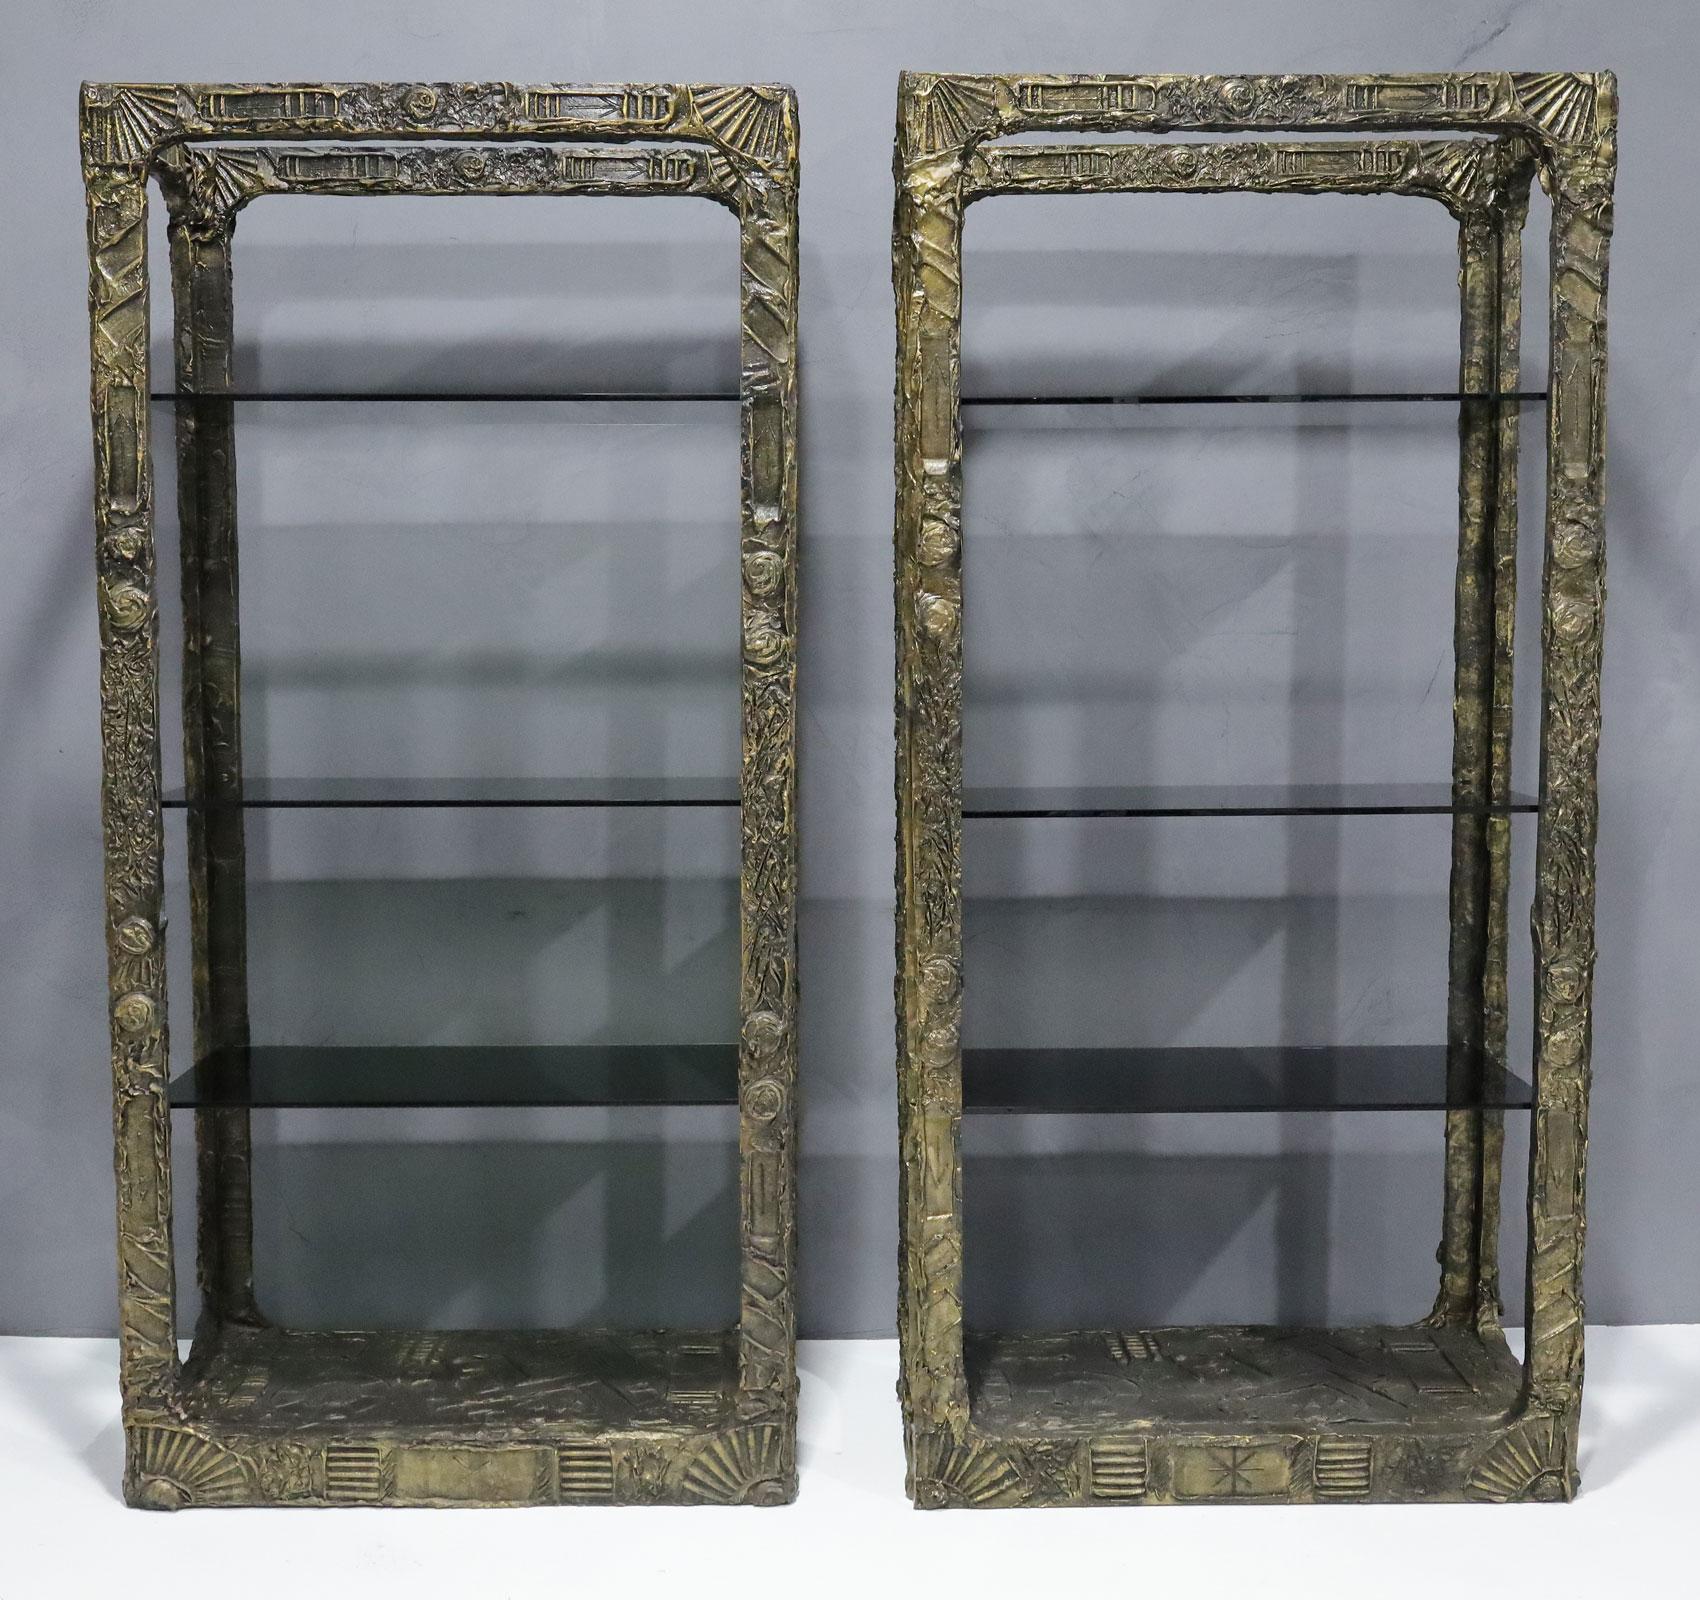 A stunning pair of Adrian Pearsall brutalist style etageres. These are in great condition. Each etagere has 3 smoked glass shelves. Theya re strong and sturdy and would look great as a room divider or banking a fireplace. 

We have touched up as